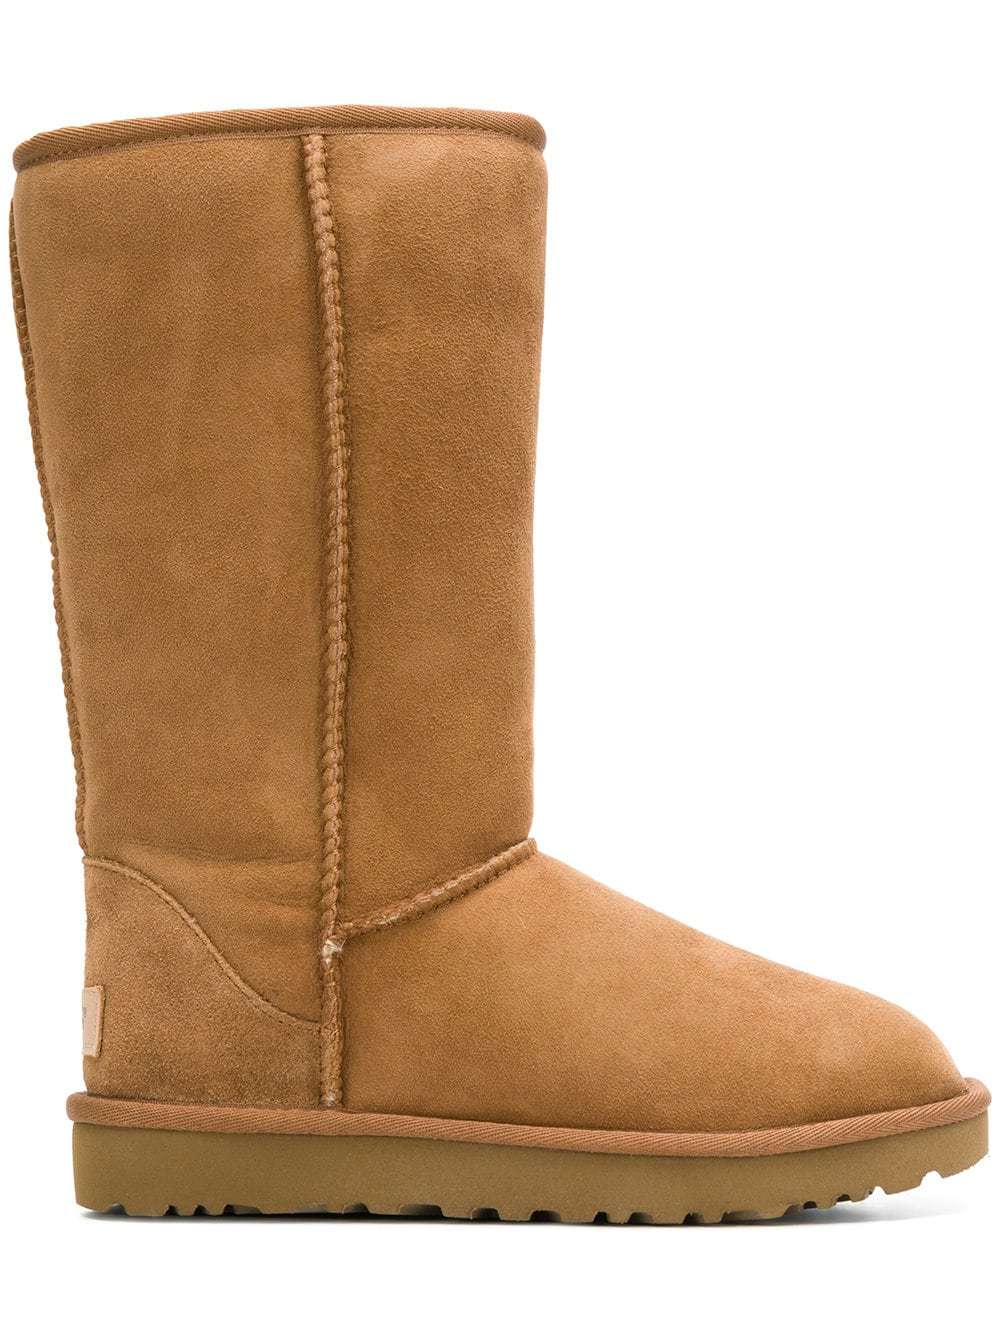 ugg tan ankle boots